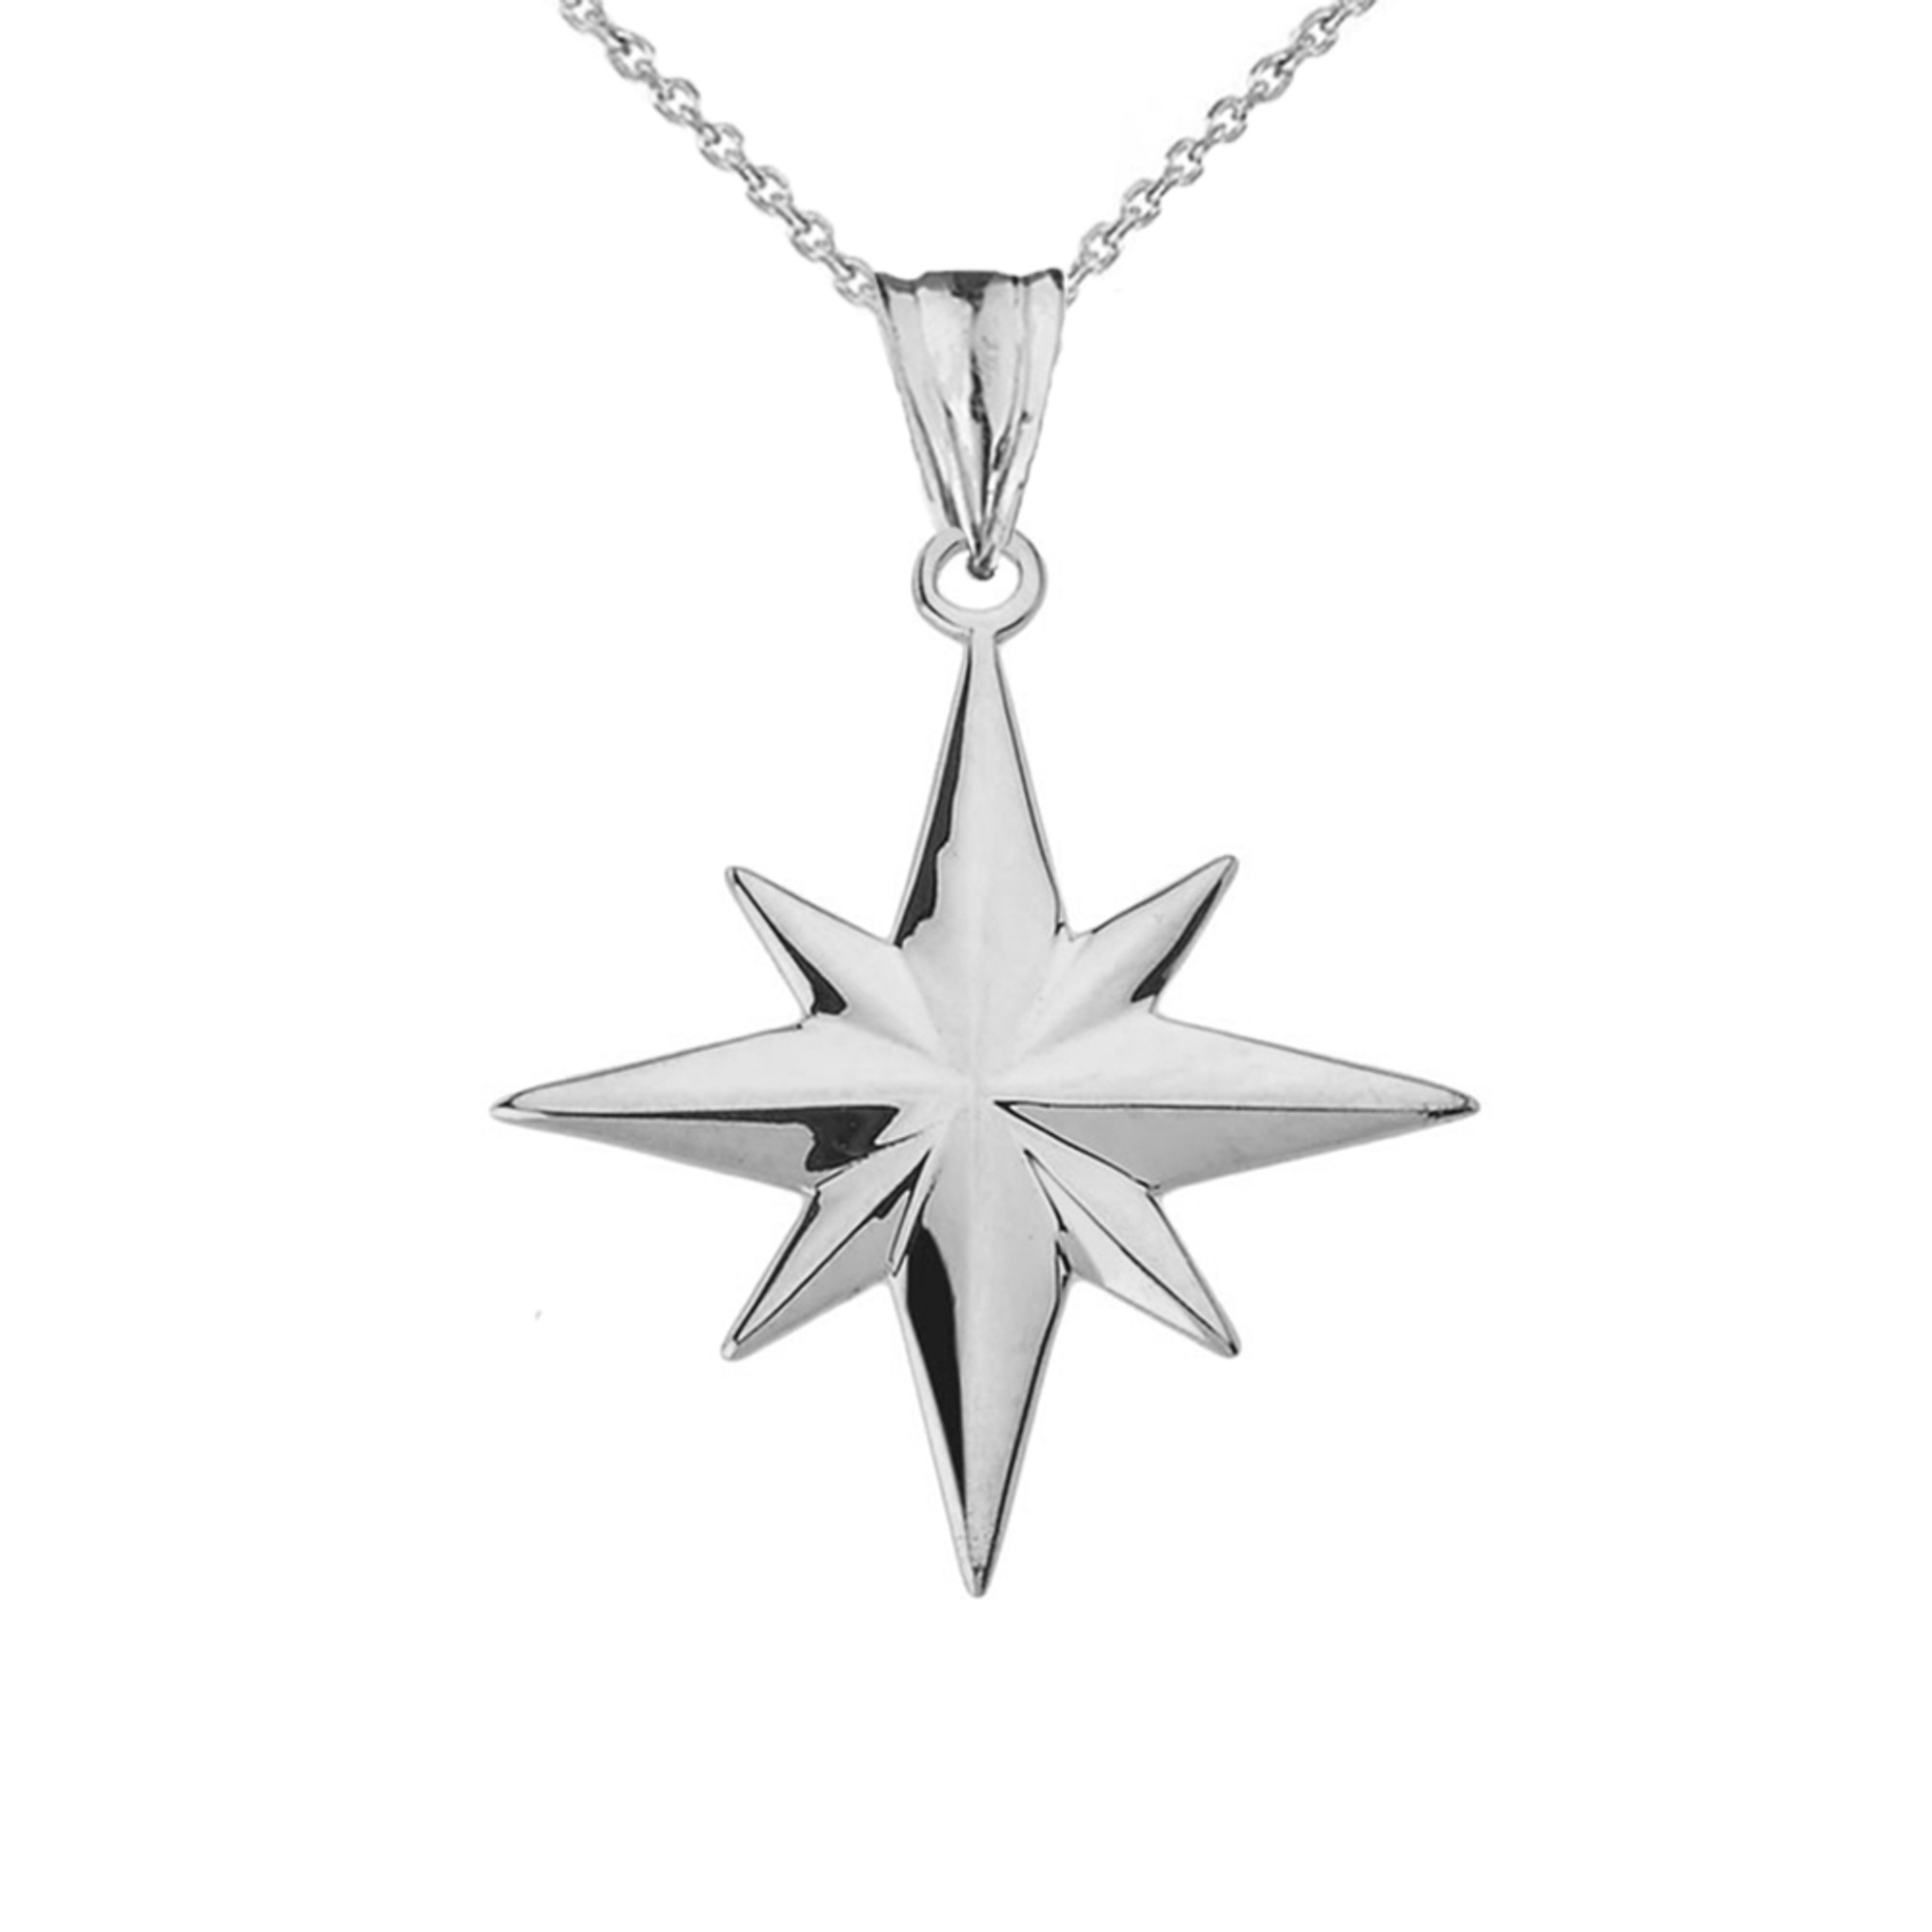 North Star Diamond Necklace - 14k Yellow Gold – EDGE of EMBER